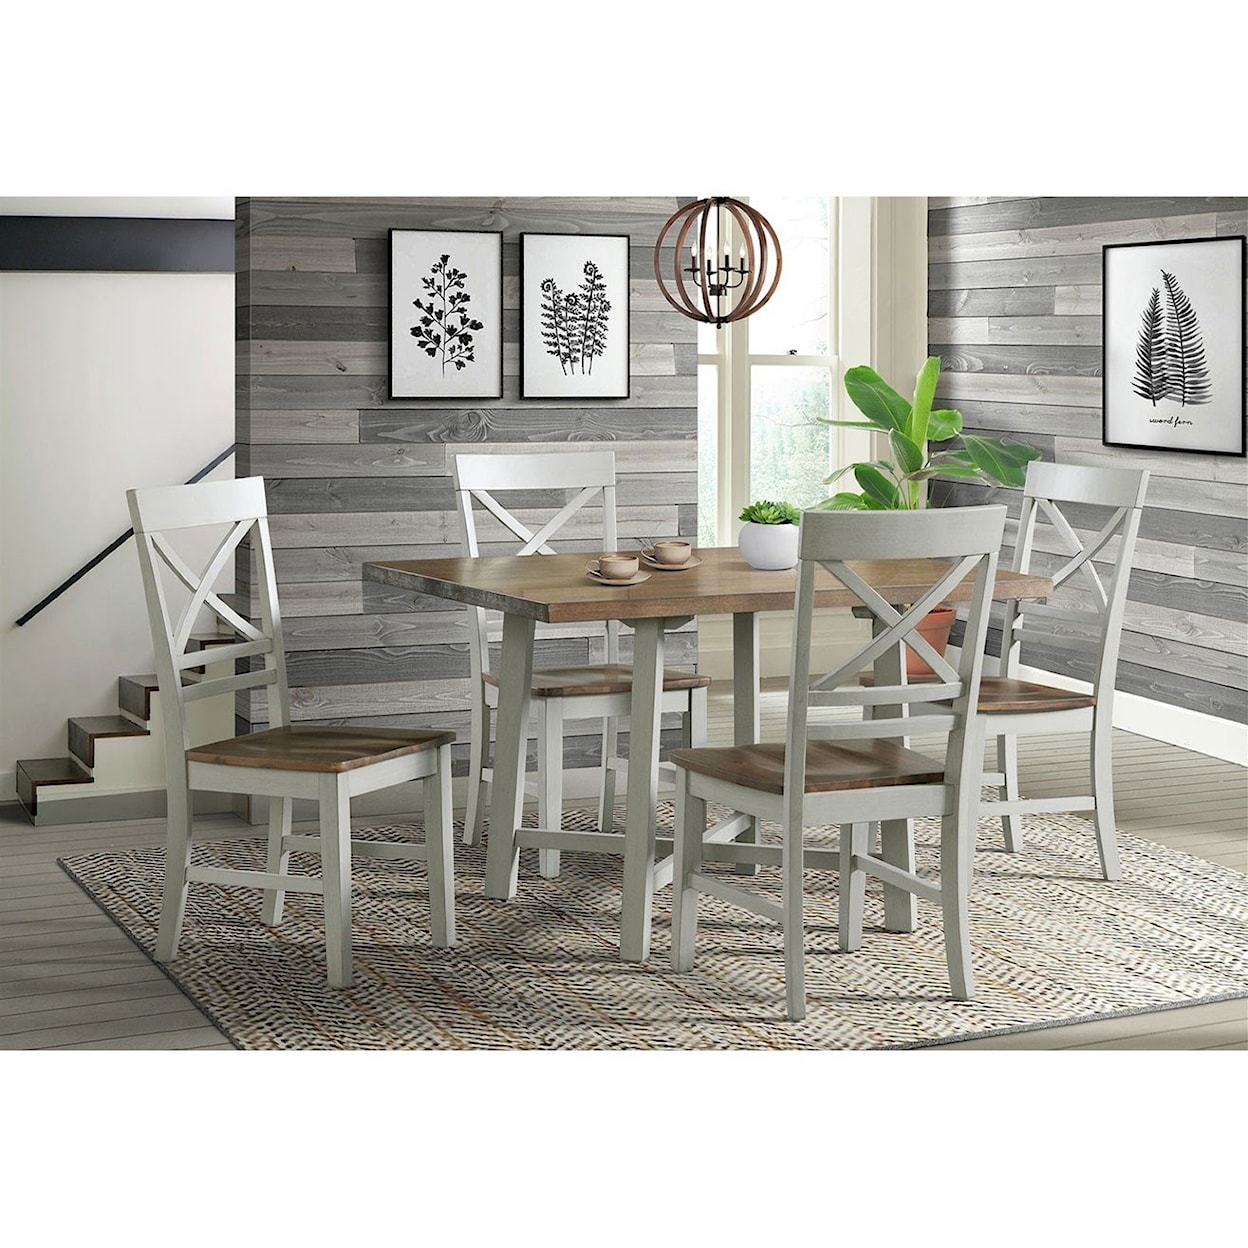 Elements International El Paso 5-Piece Table and Chair Set